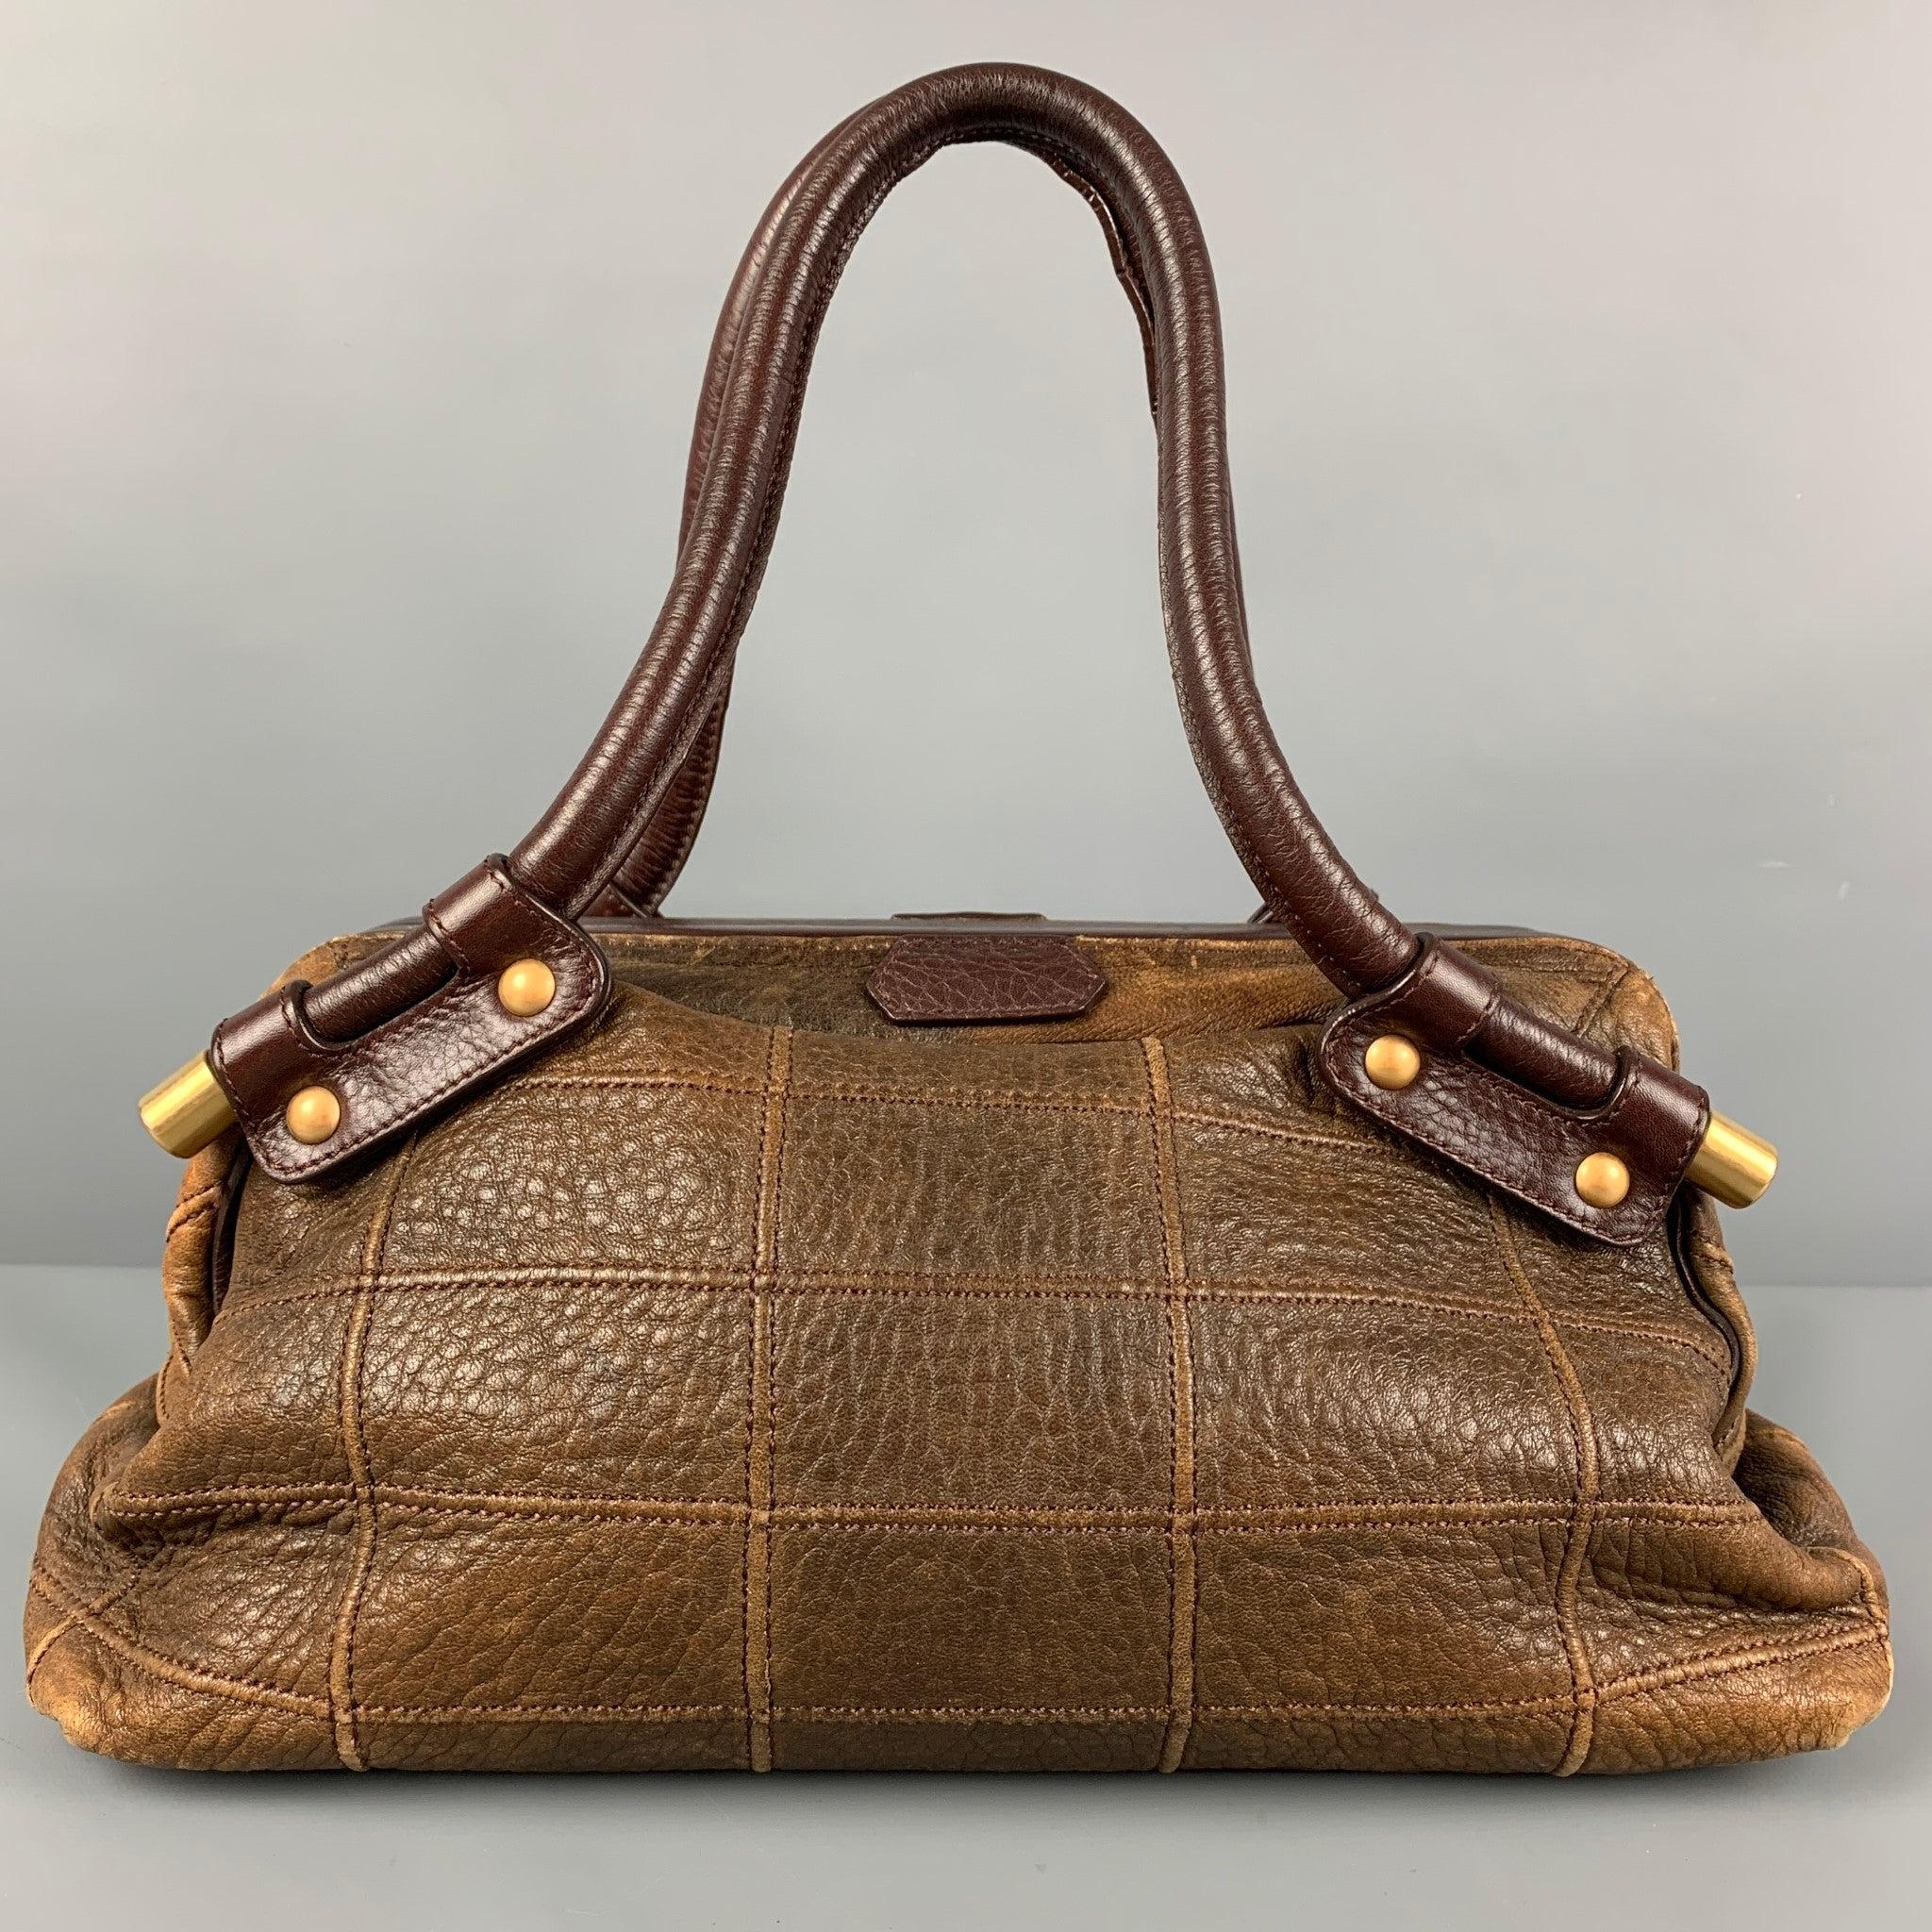 SALVATORE FERRAGAMO Brown Quilted Leather Satchel Handbag In Good Condition For Sale In San Francisco, CA